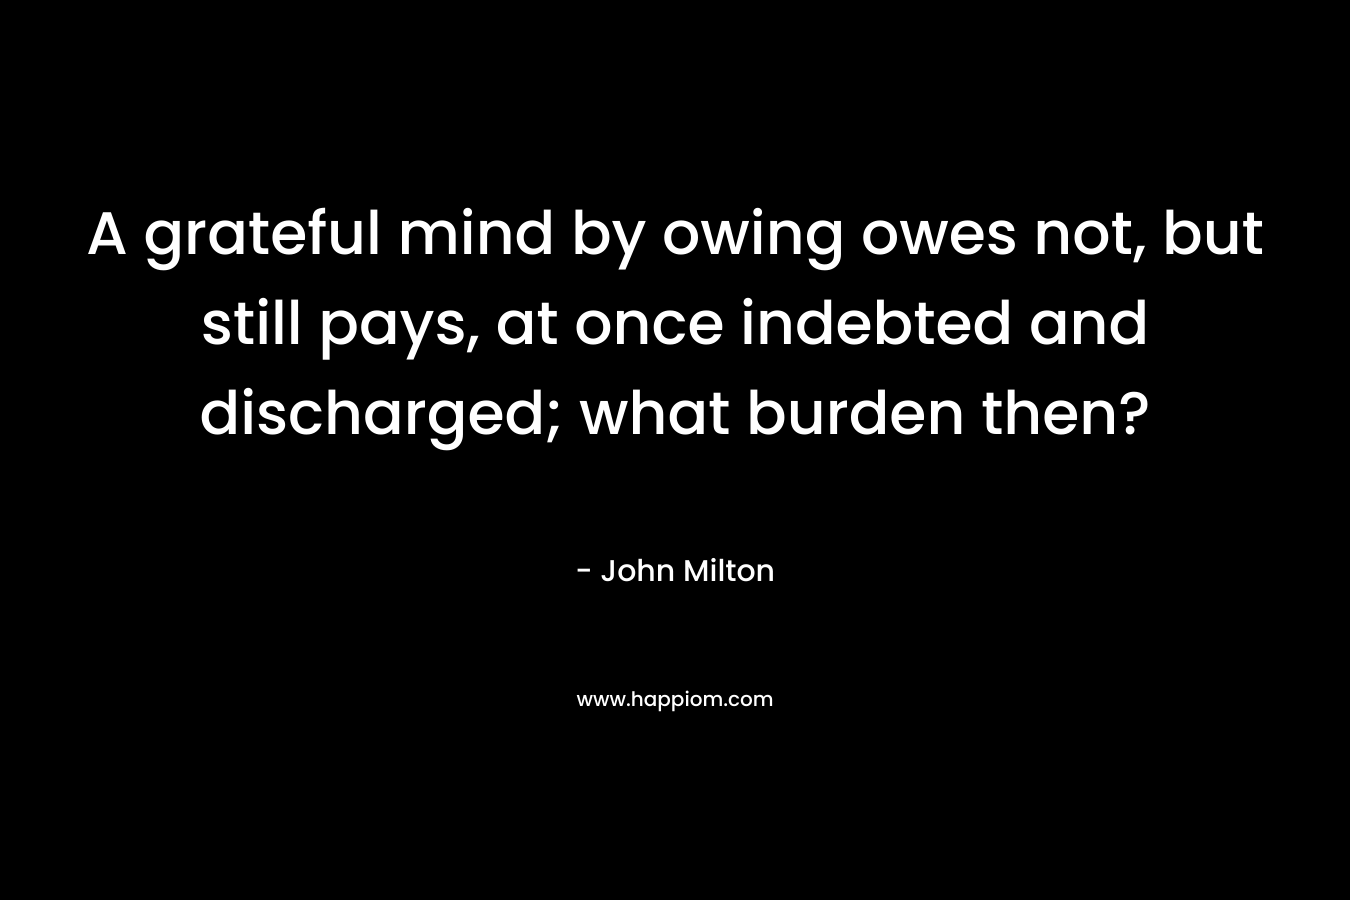 A grateful mind by owing owes not, but still pays, at once indebted and discharged; what burden then?